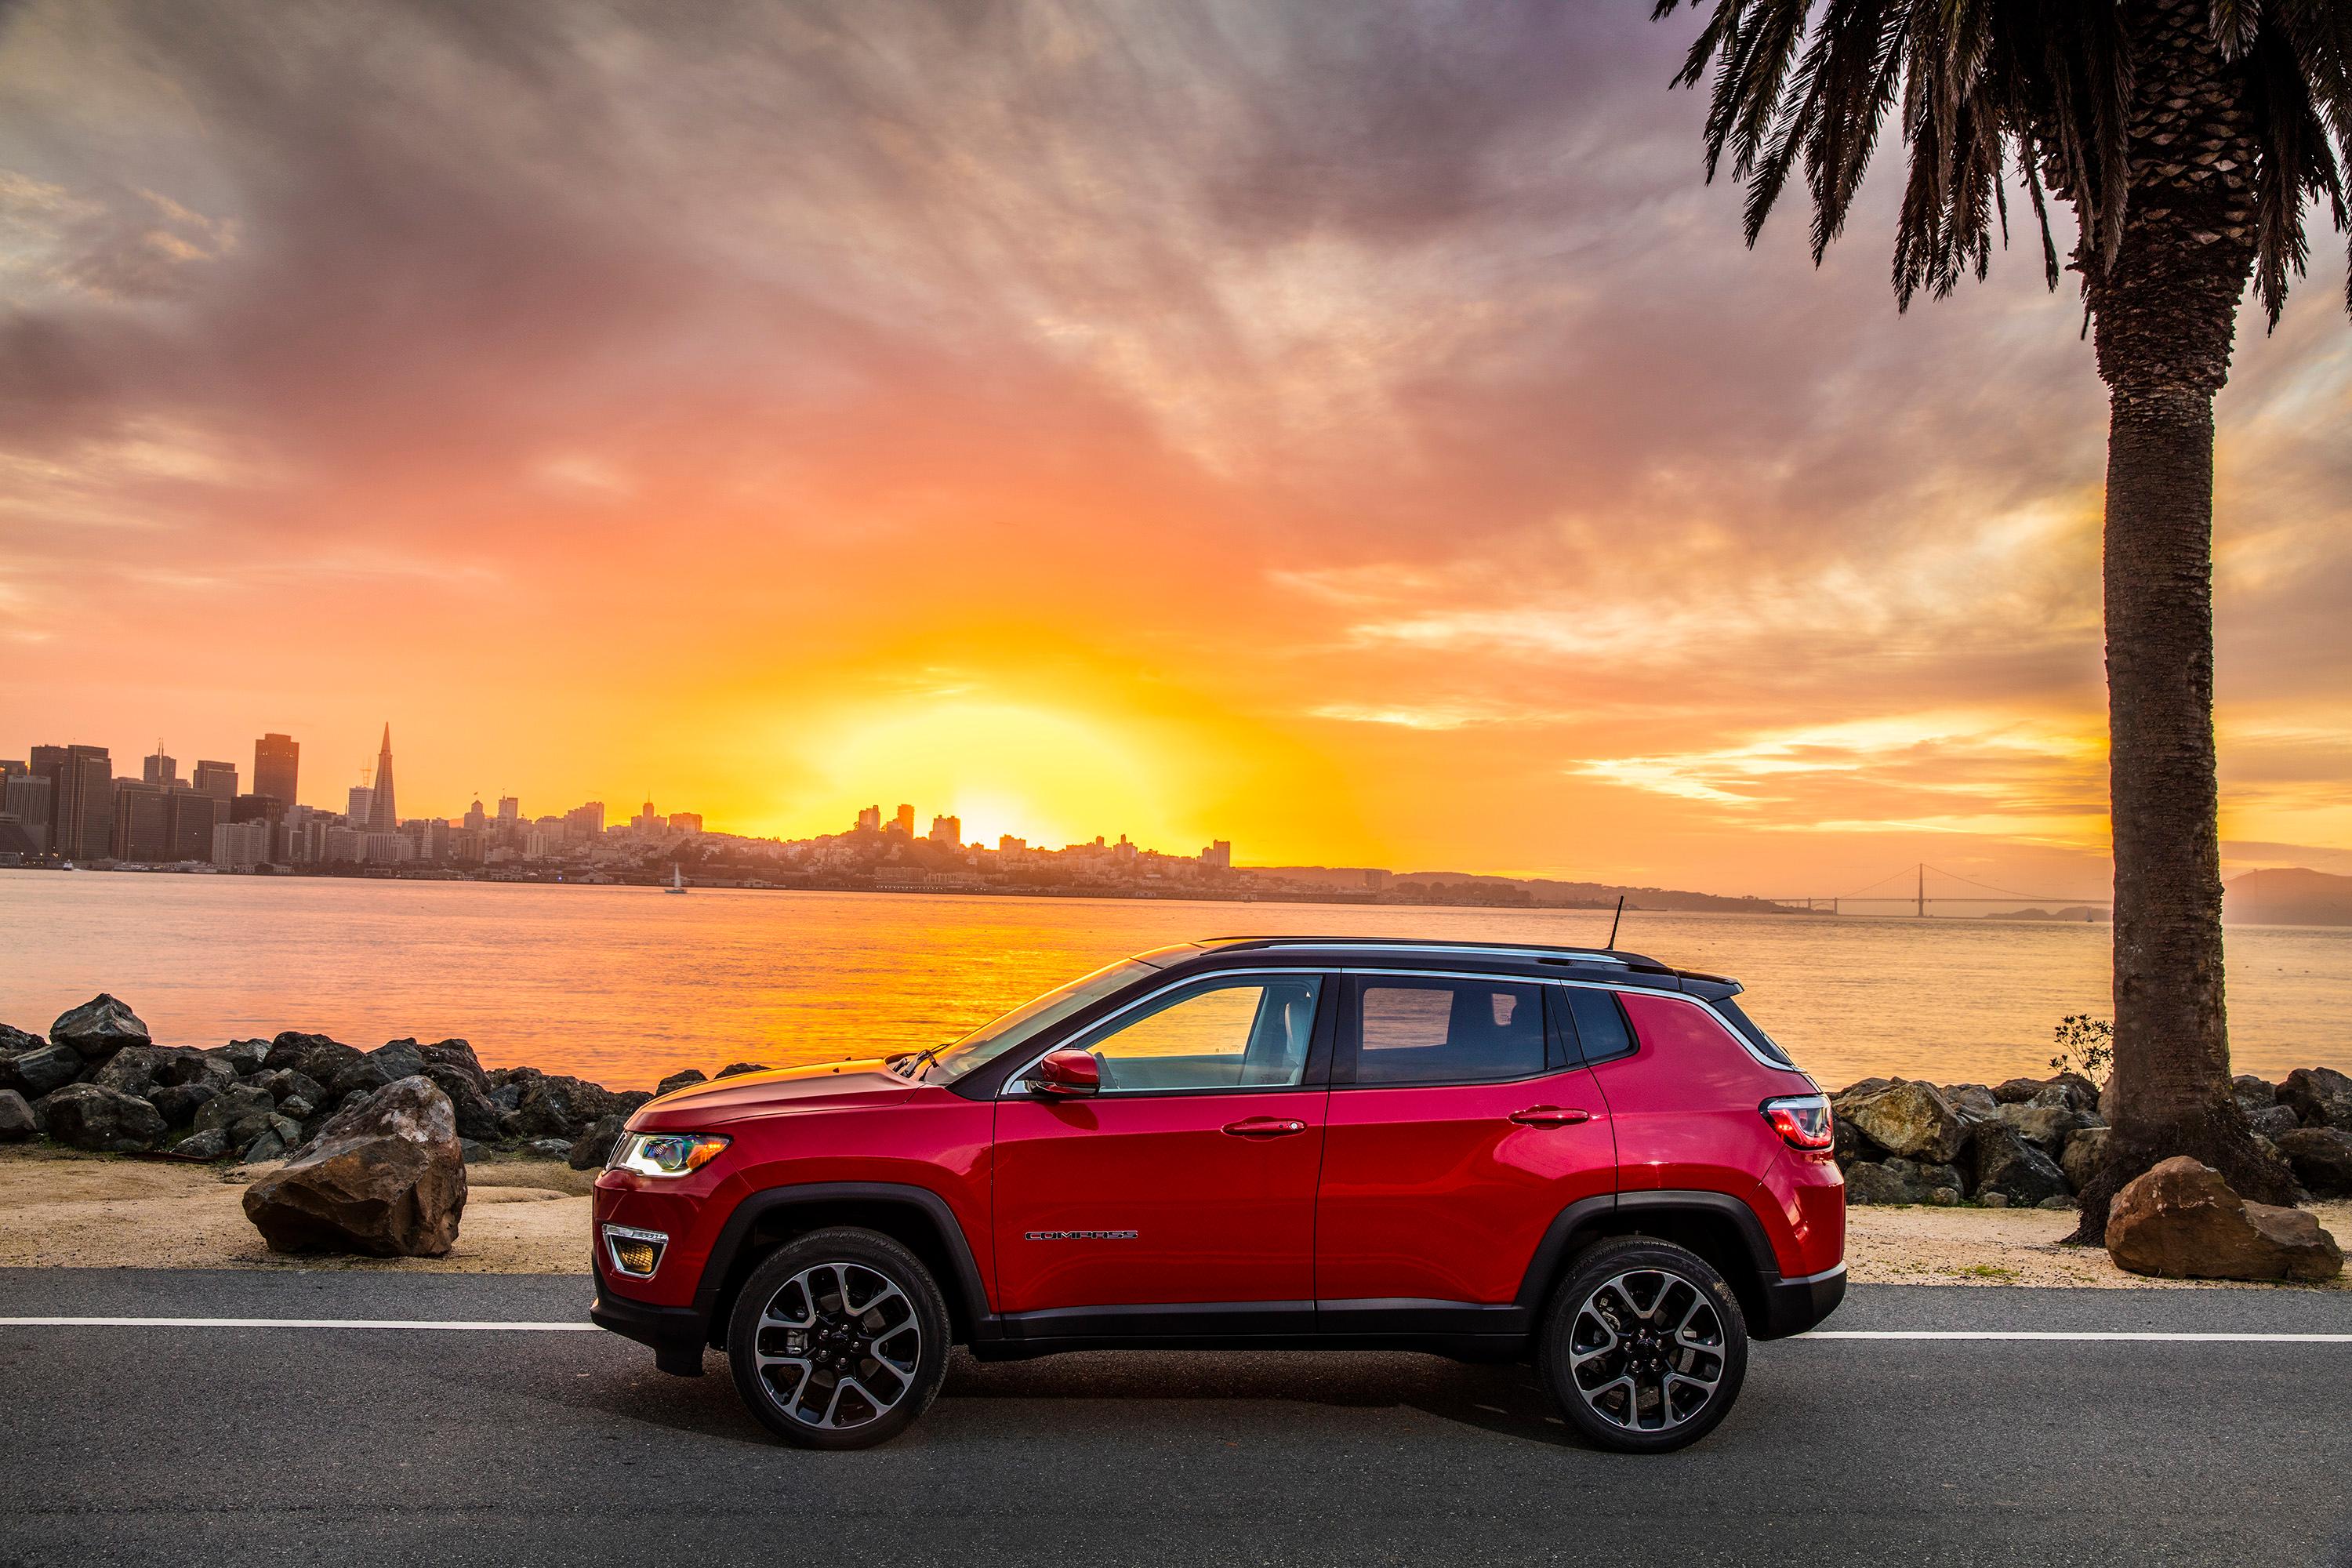 Image of a red Jeep Compass driving past a palm tree and large body of water during sunset.